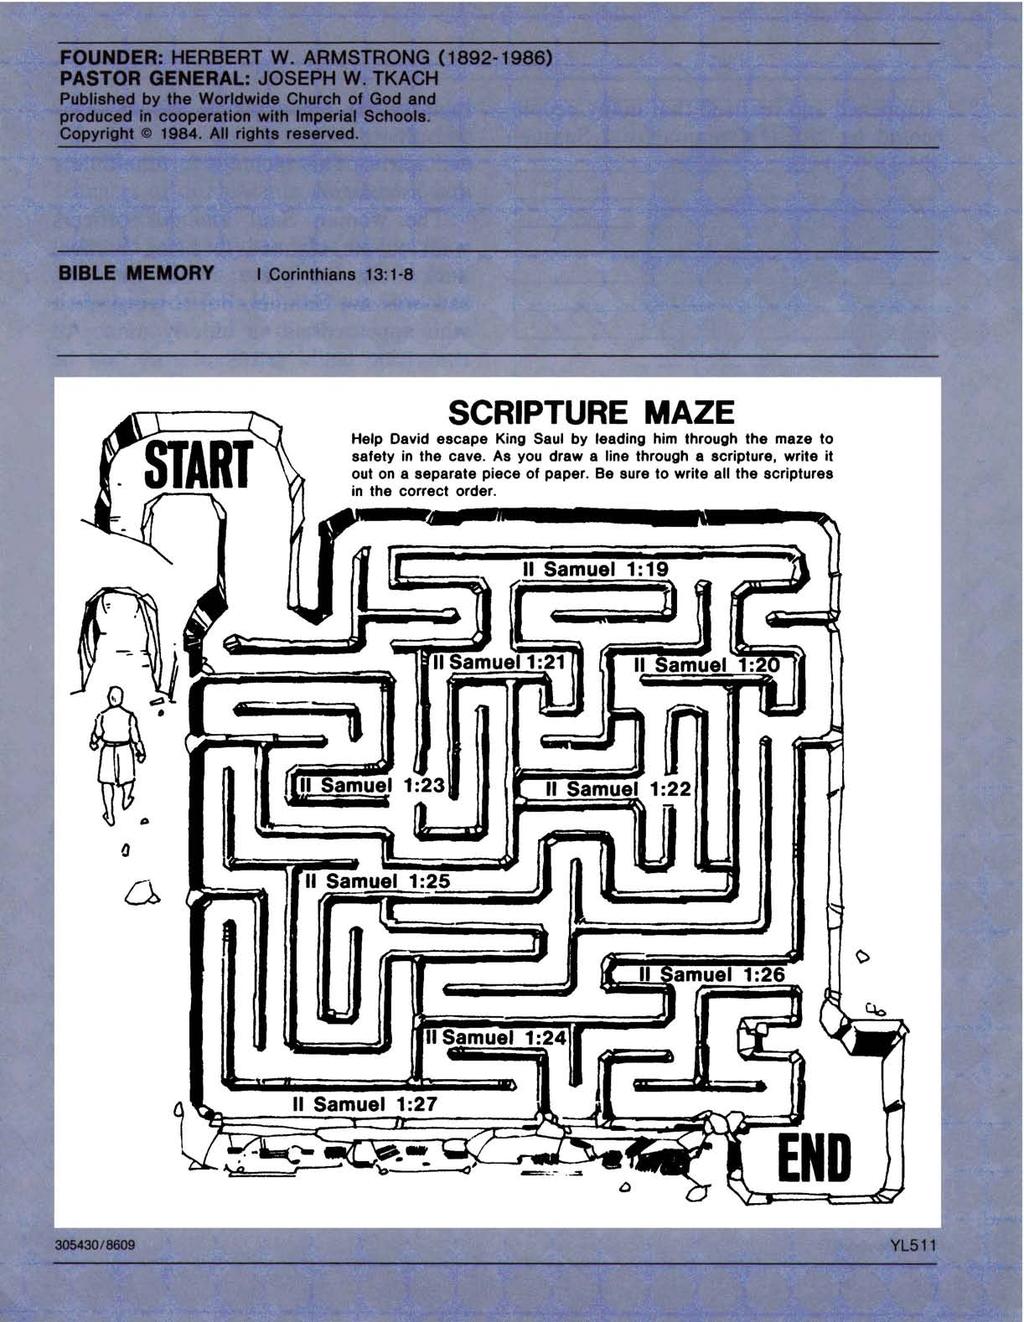 SCRIPTURE MAZE Help David escape King Saul by leading him through the maze to safety in the cave. As you draw a line through a scripture, write it out on a separate piece of paper.